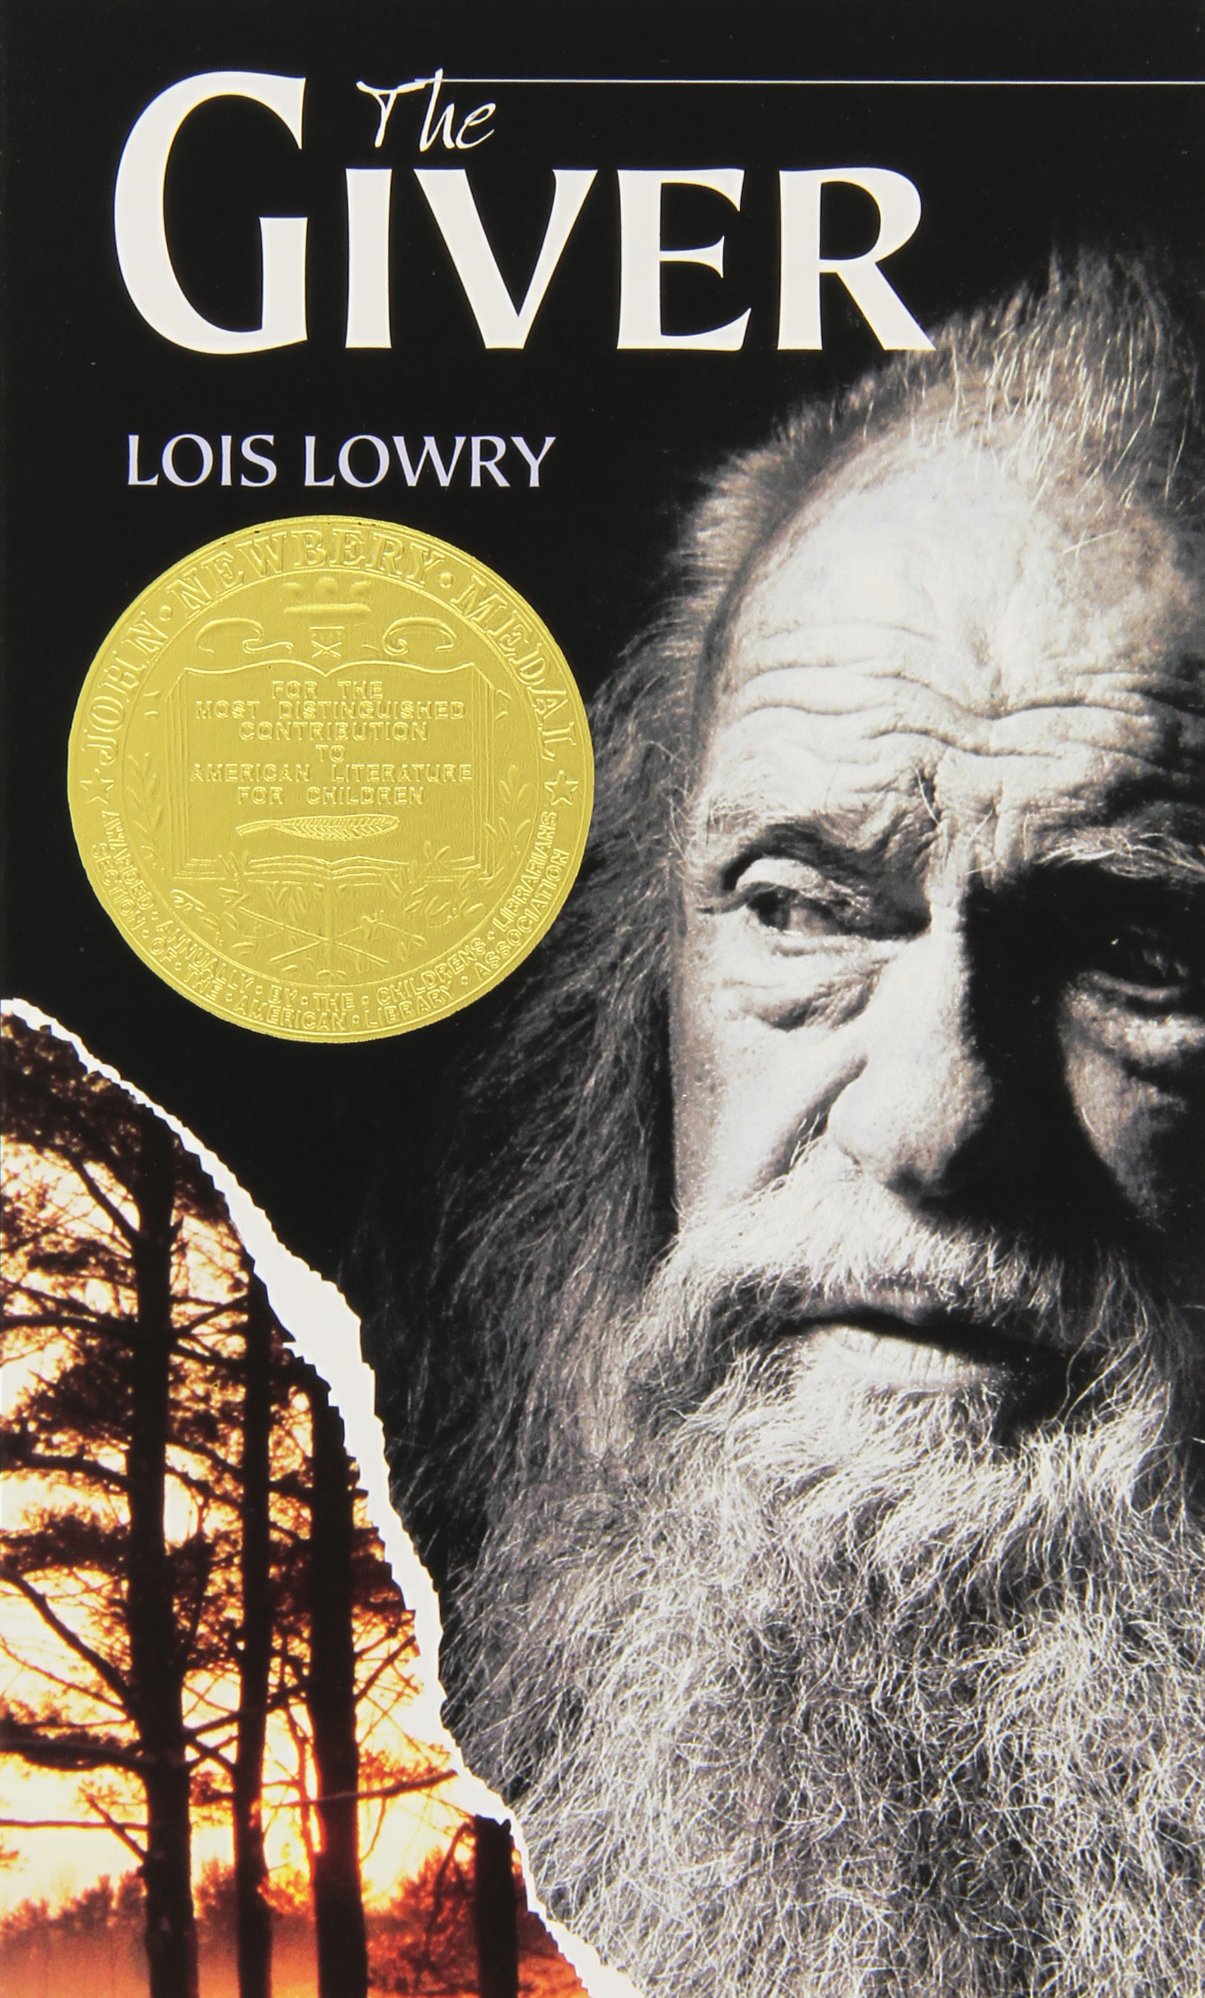 The Giver Book Review by Margaret MacGillivary